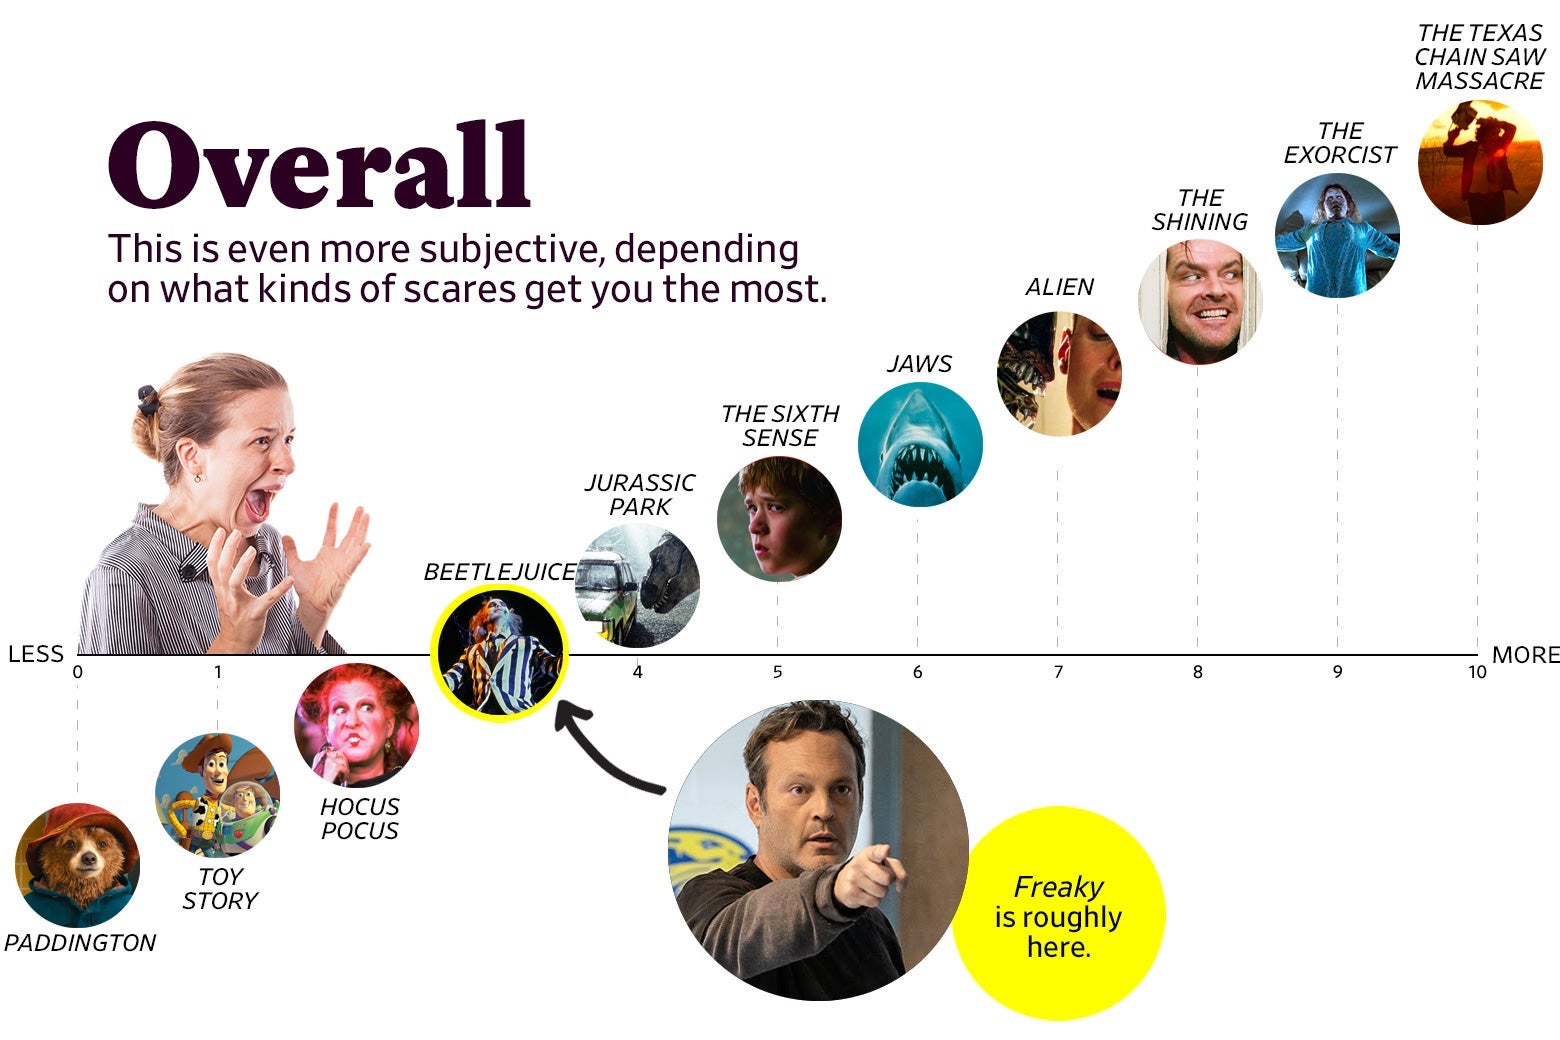 A chart titled “Overall: This is even more subjective, depending on what kinds of scares get you the most” shows that Freaky ranks as a 3 overall, roughly the same as Beetlejuice. The scale ranges from Paddington (0) to the original Texas Chain Saw Massacre (10).